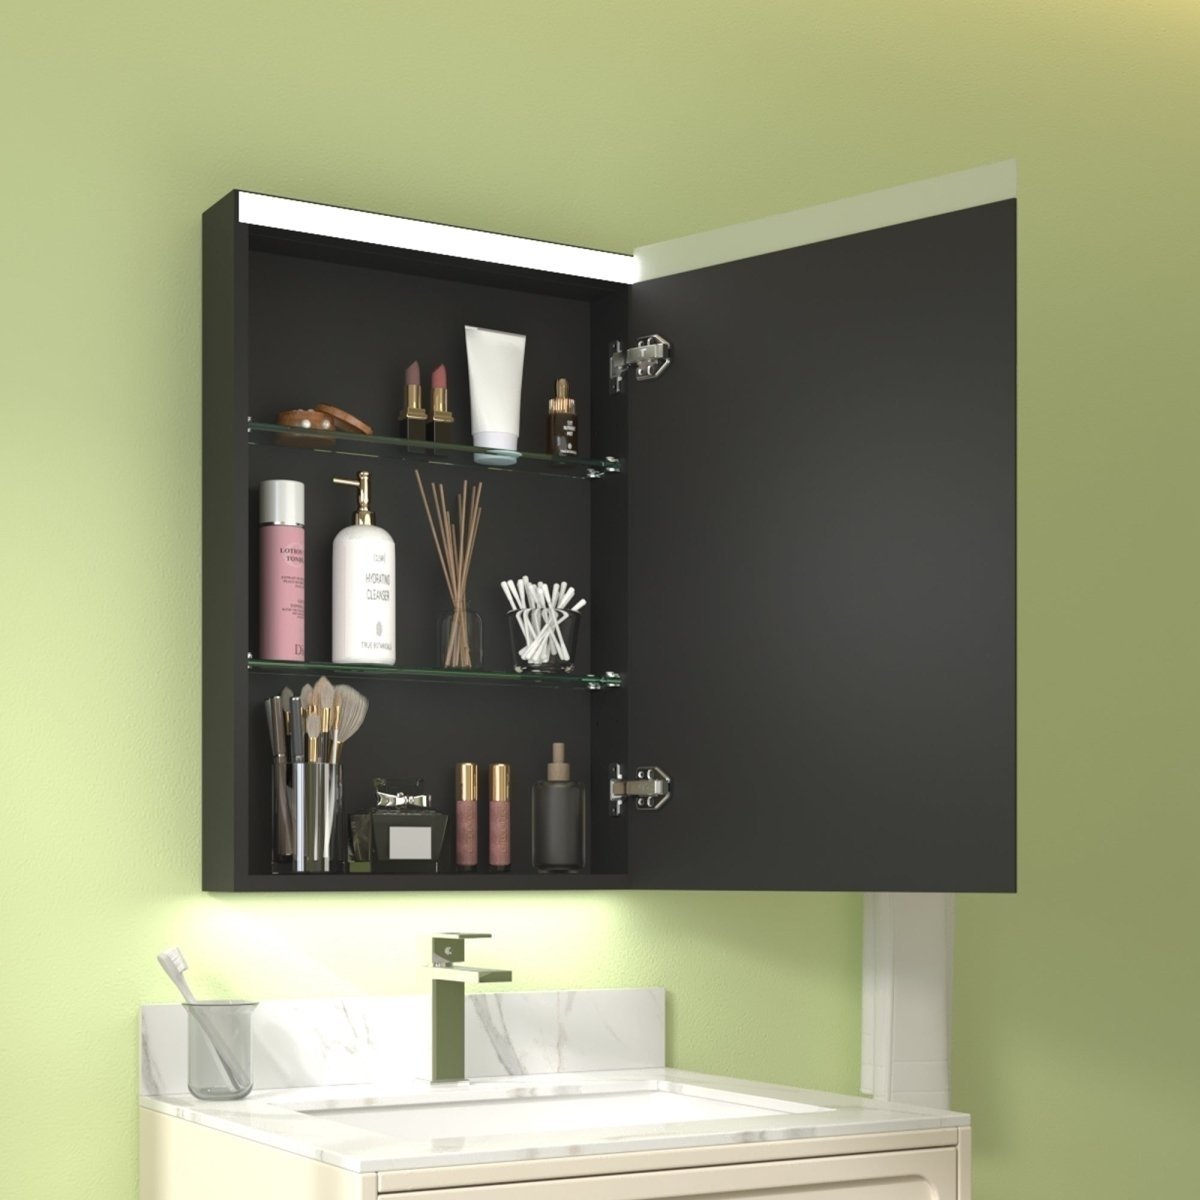 ExBrite 20 W X 30 H LED Bathroom Led Light Medicine Cabinet With Mirrors - Hinge On Right Side